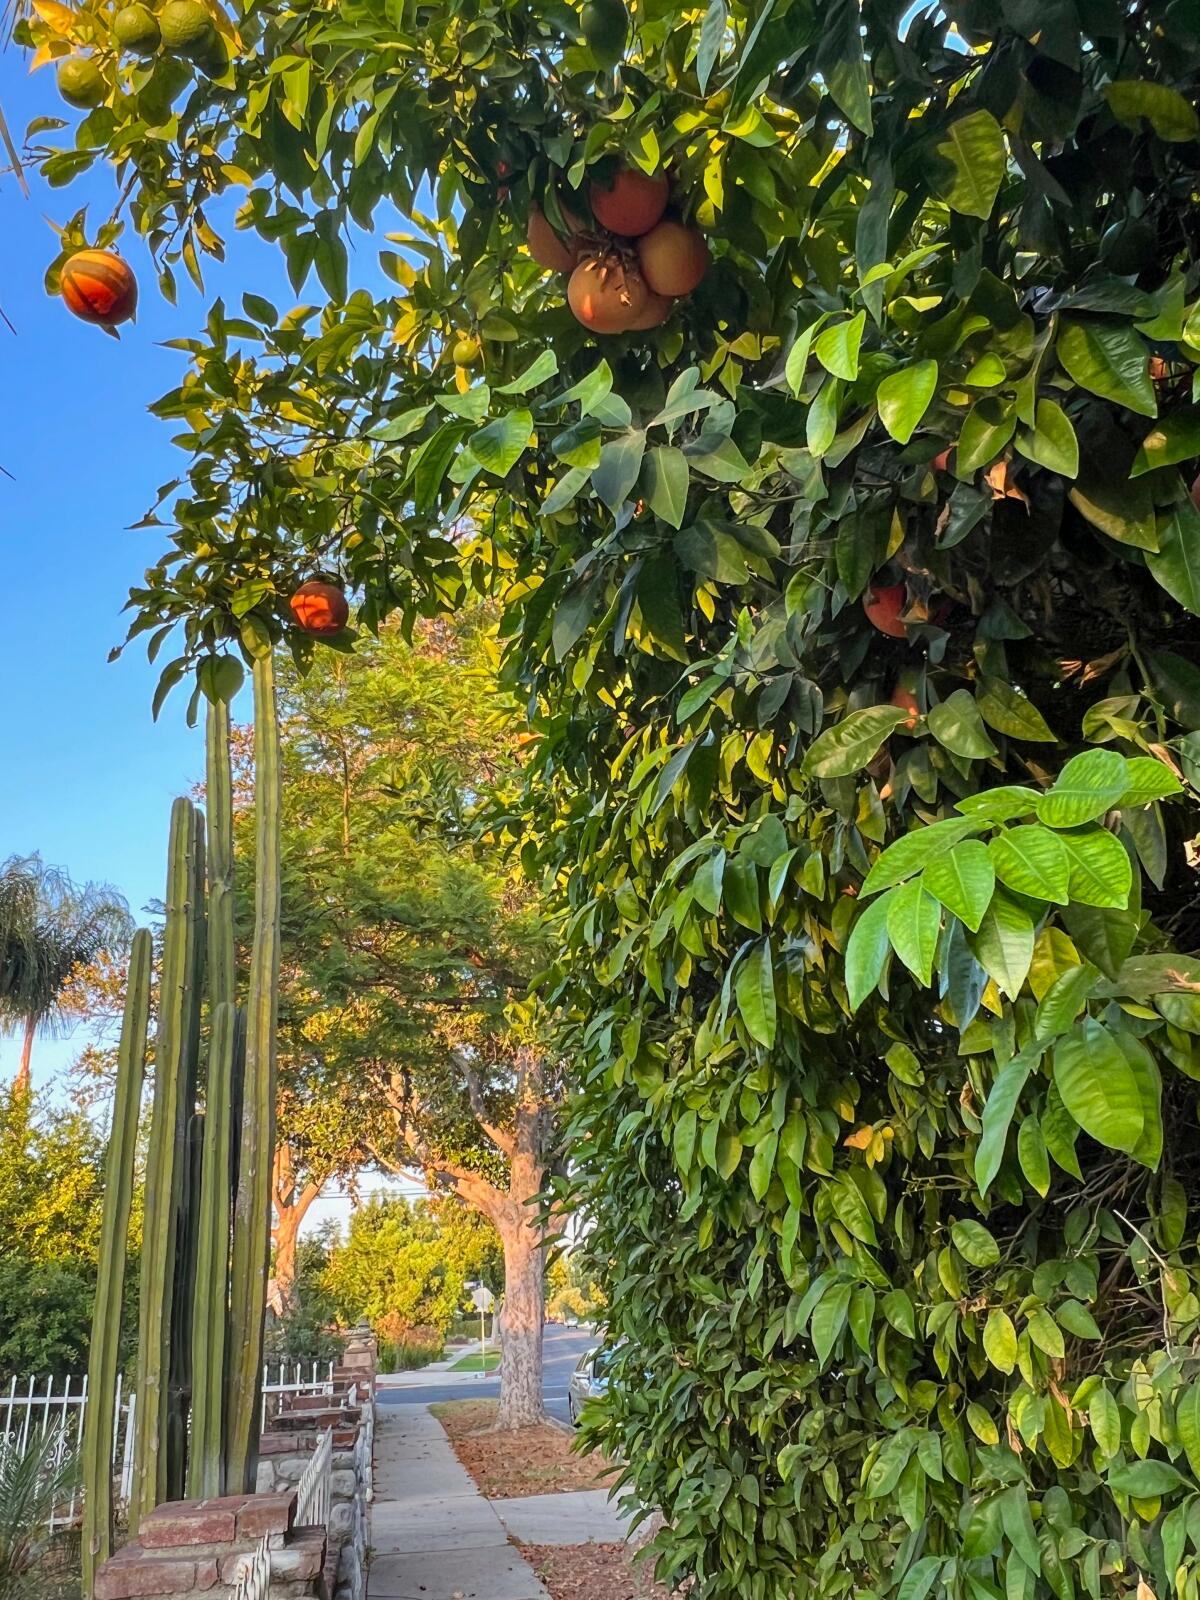 Grapefruits in a tree hang over a sidewalk.